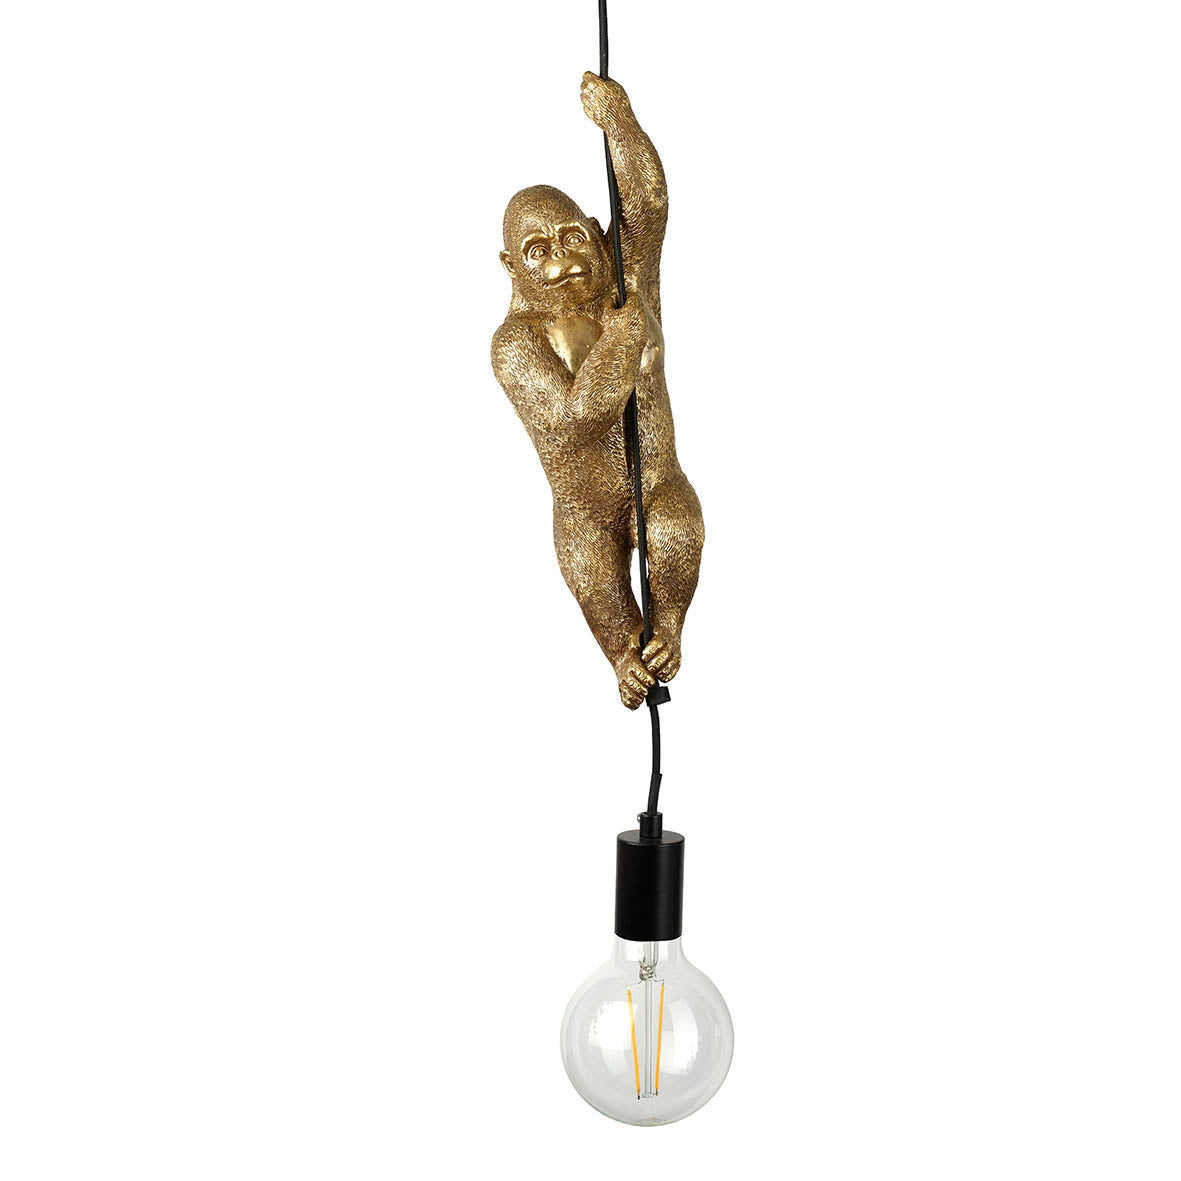 Hanging Gorilla Ceiling Pendant Light in an Antique Gold Finish